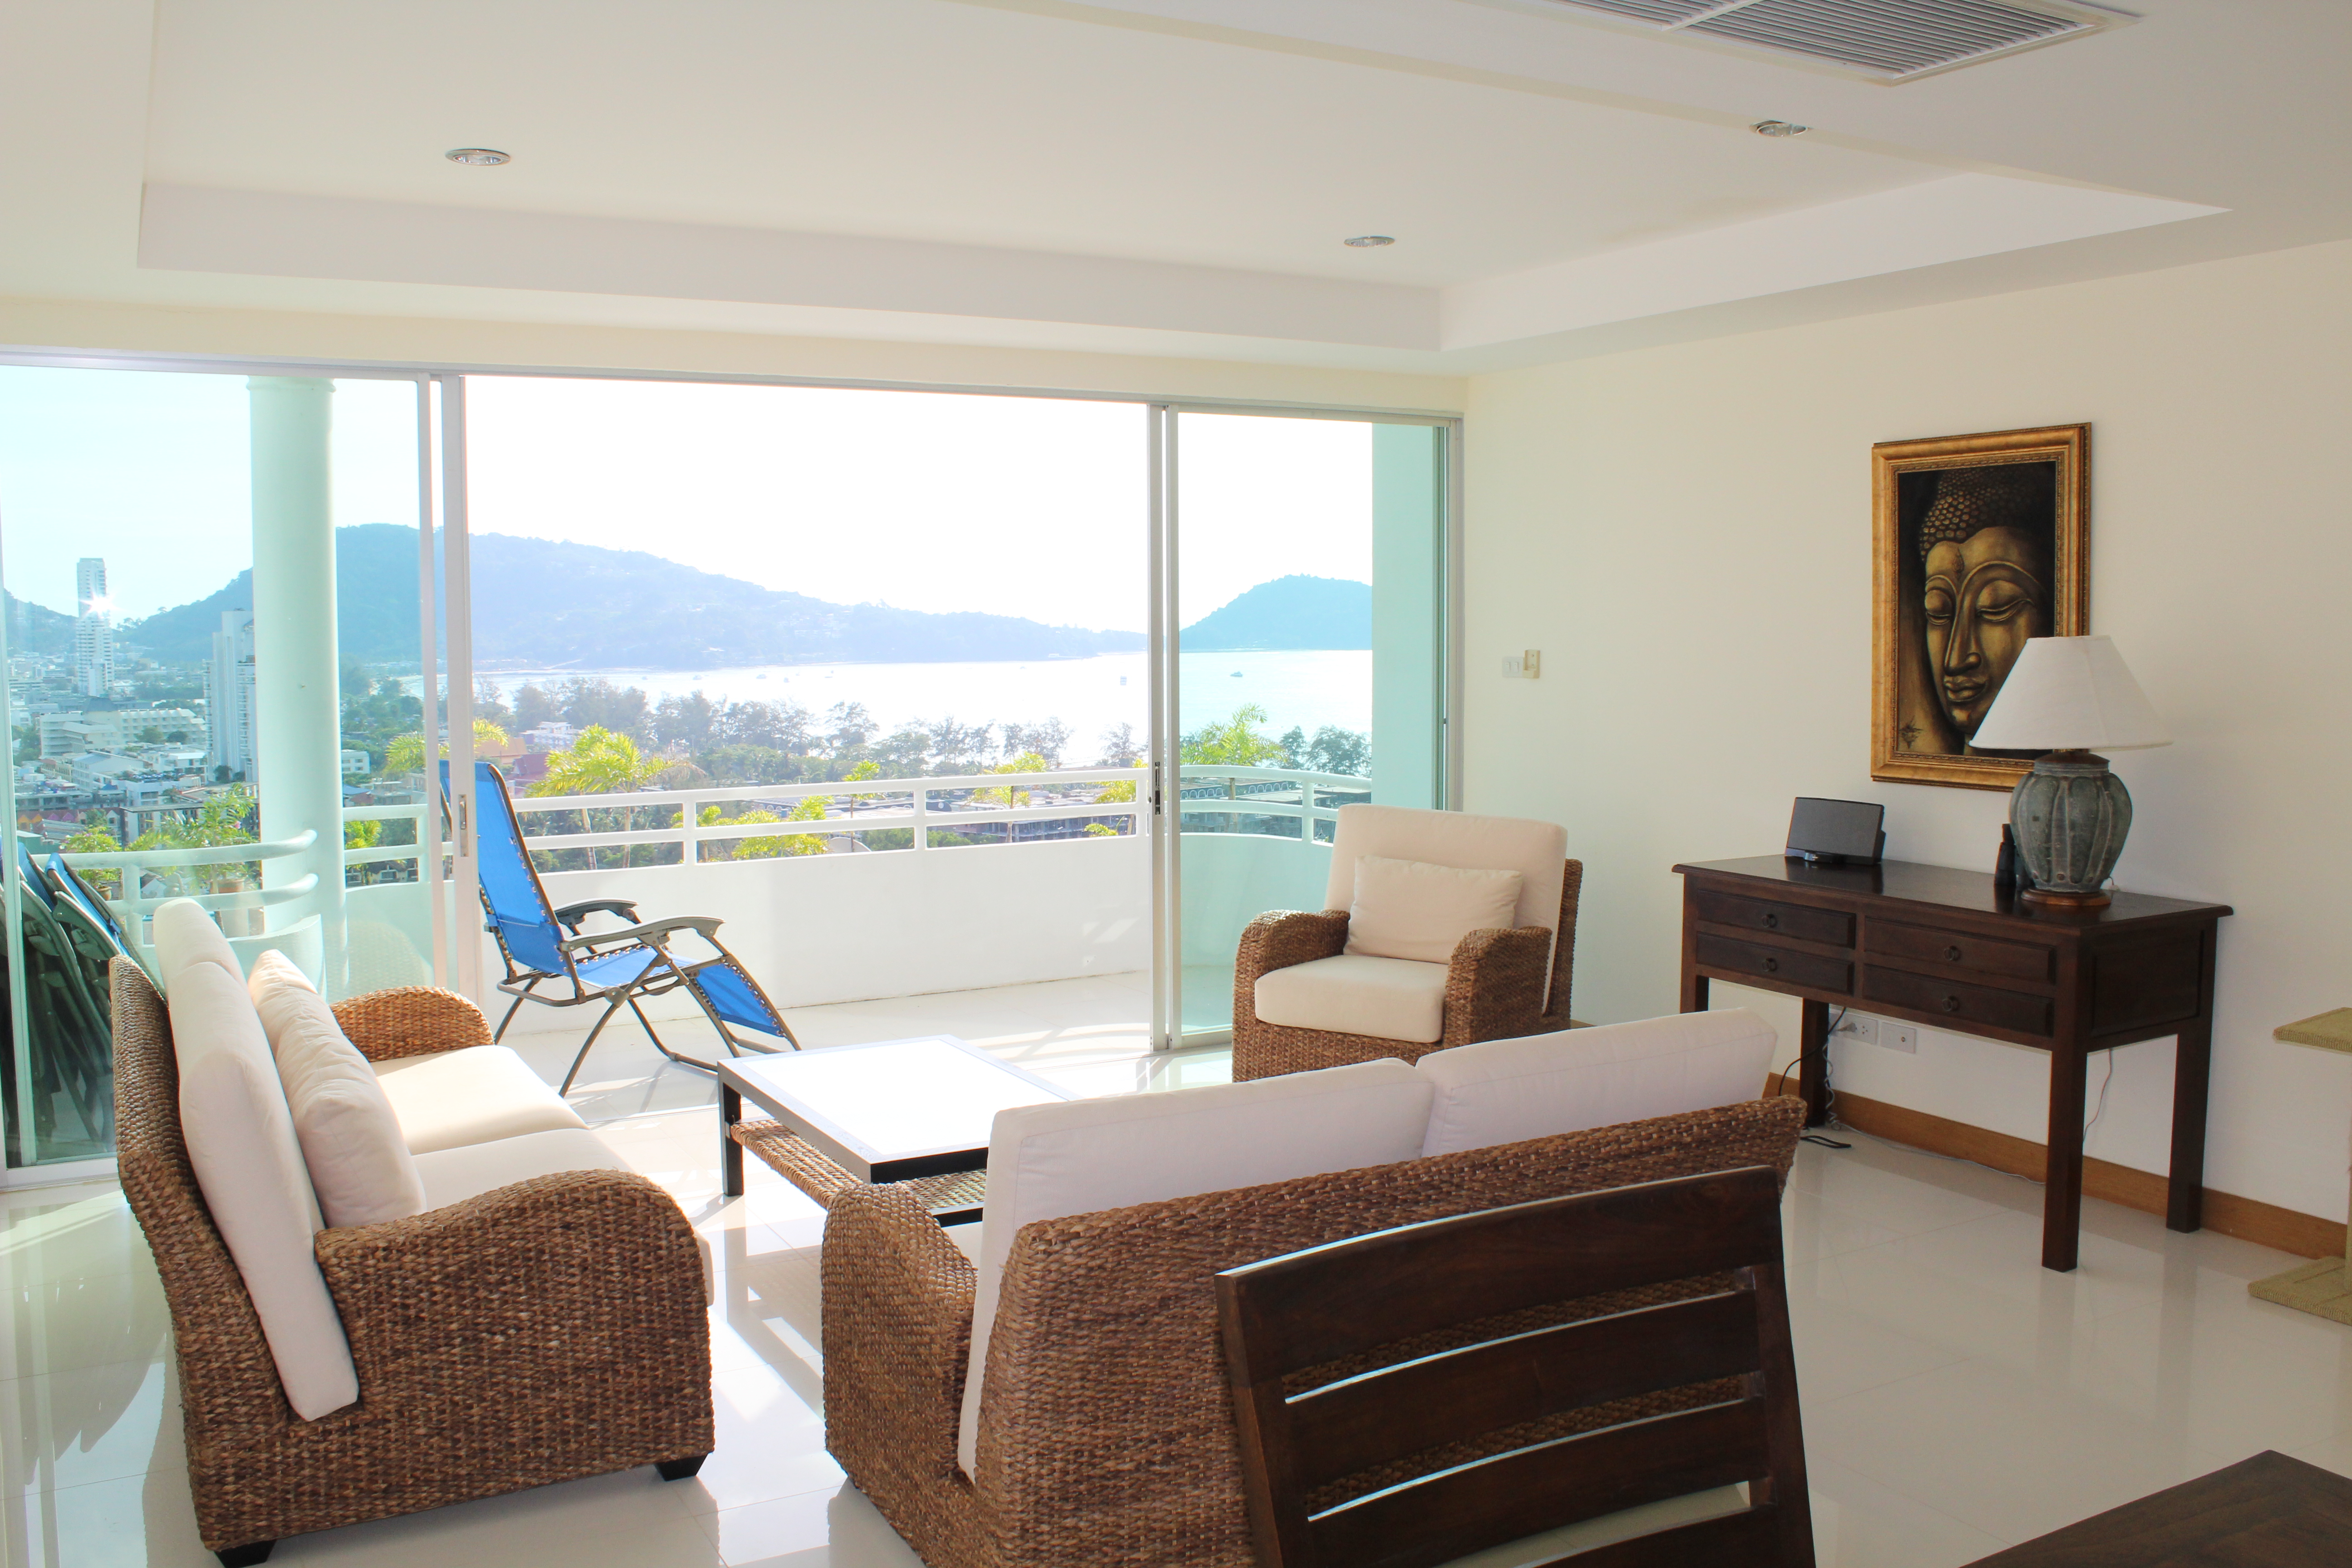 Five level Sea View townhome is built on a hillside in Patong Phuket